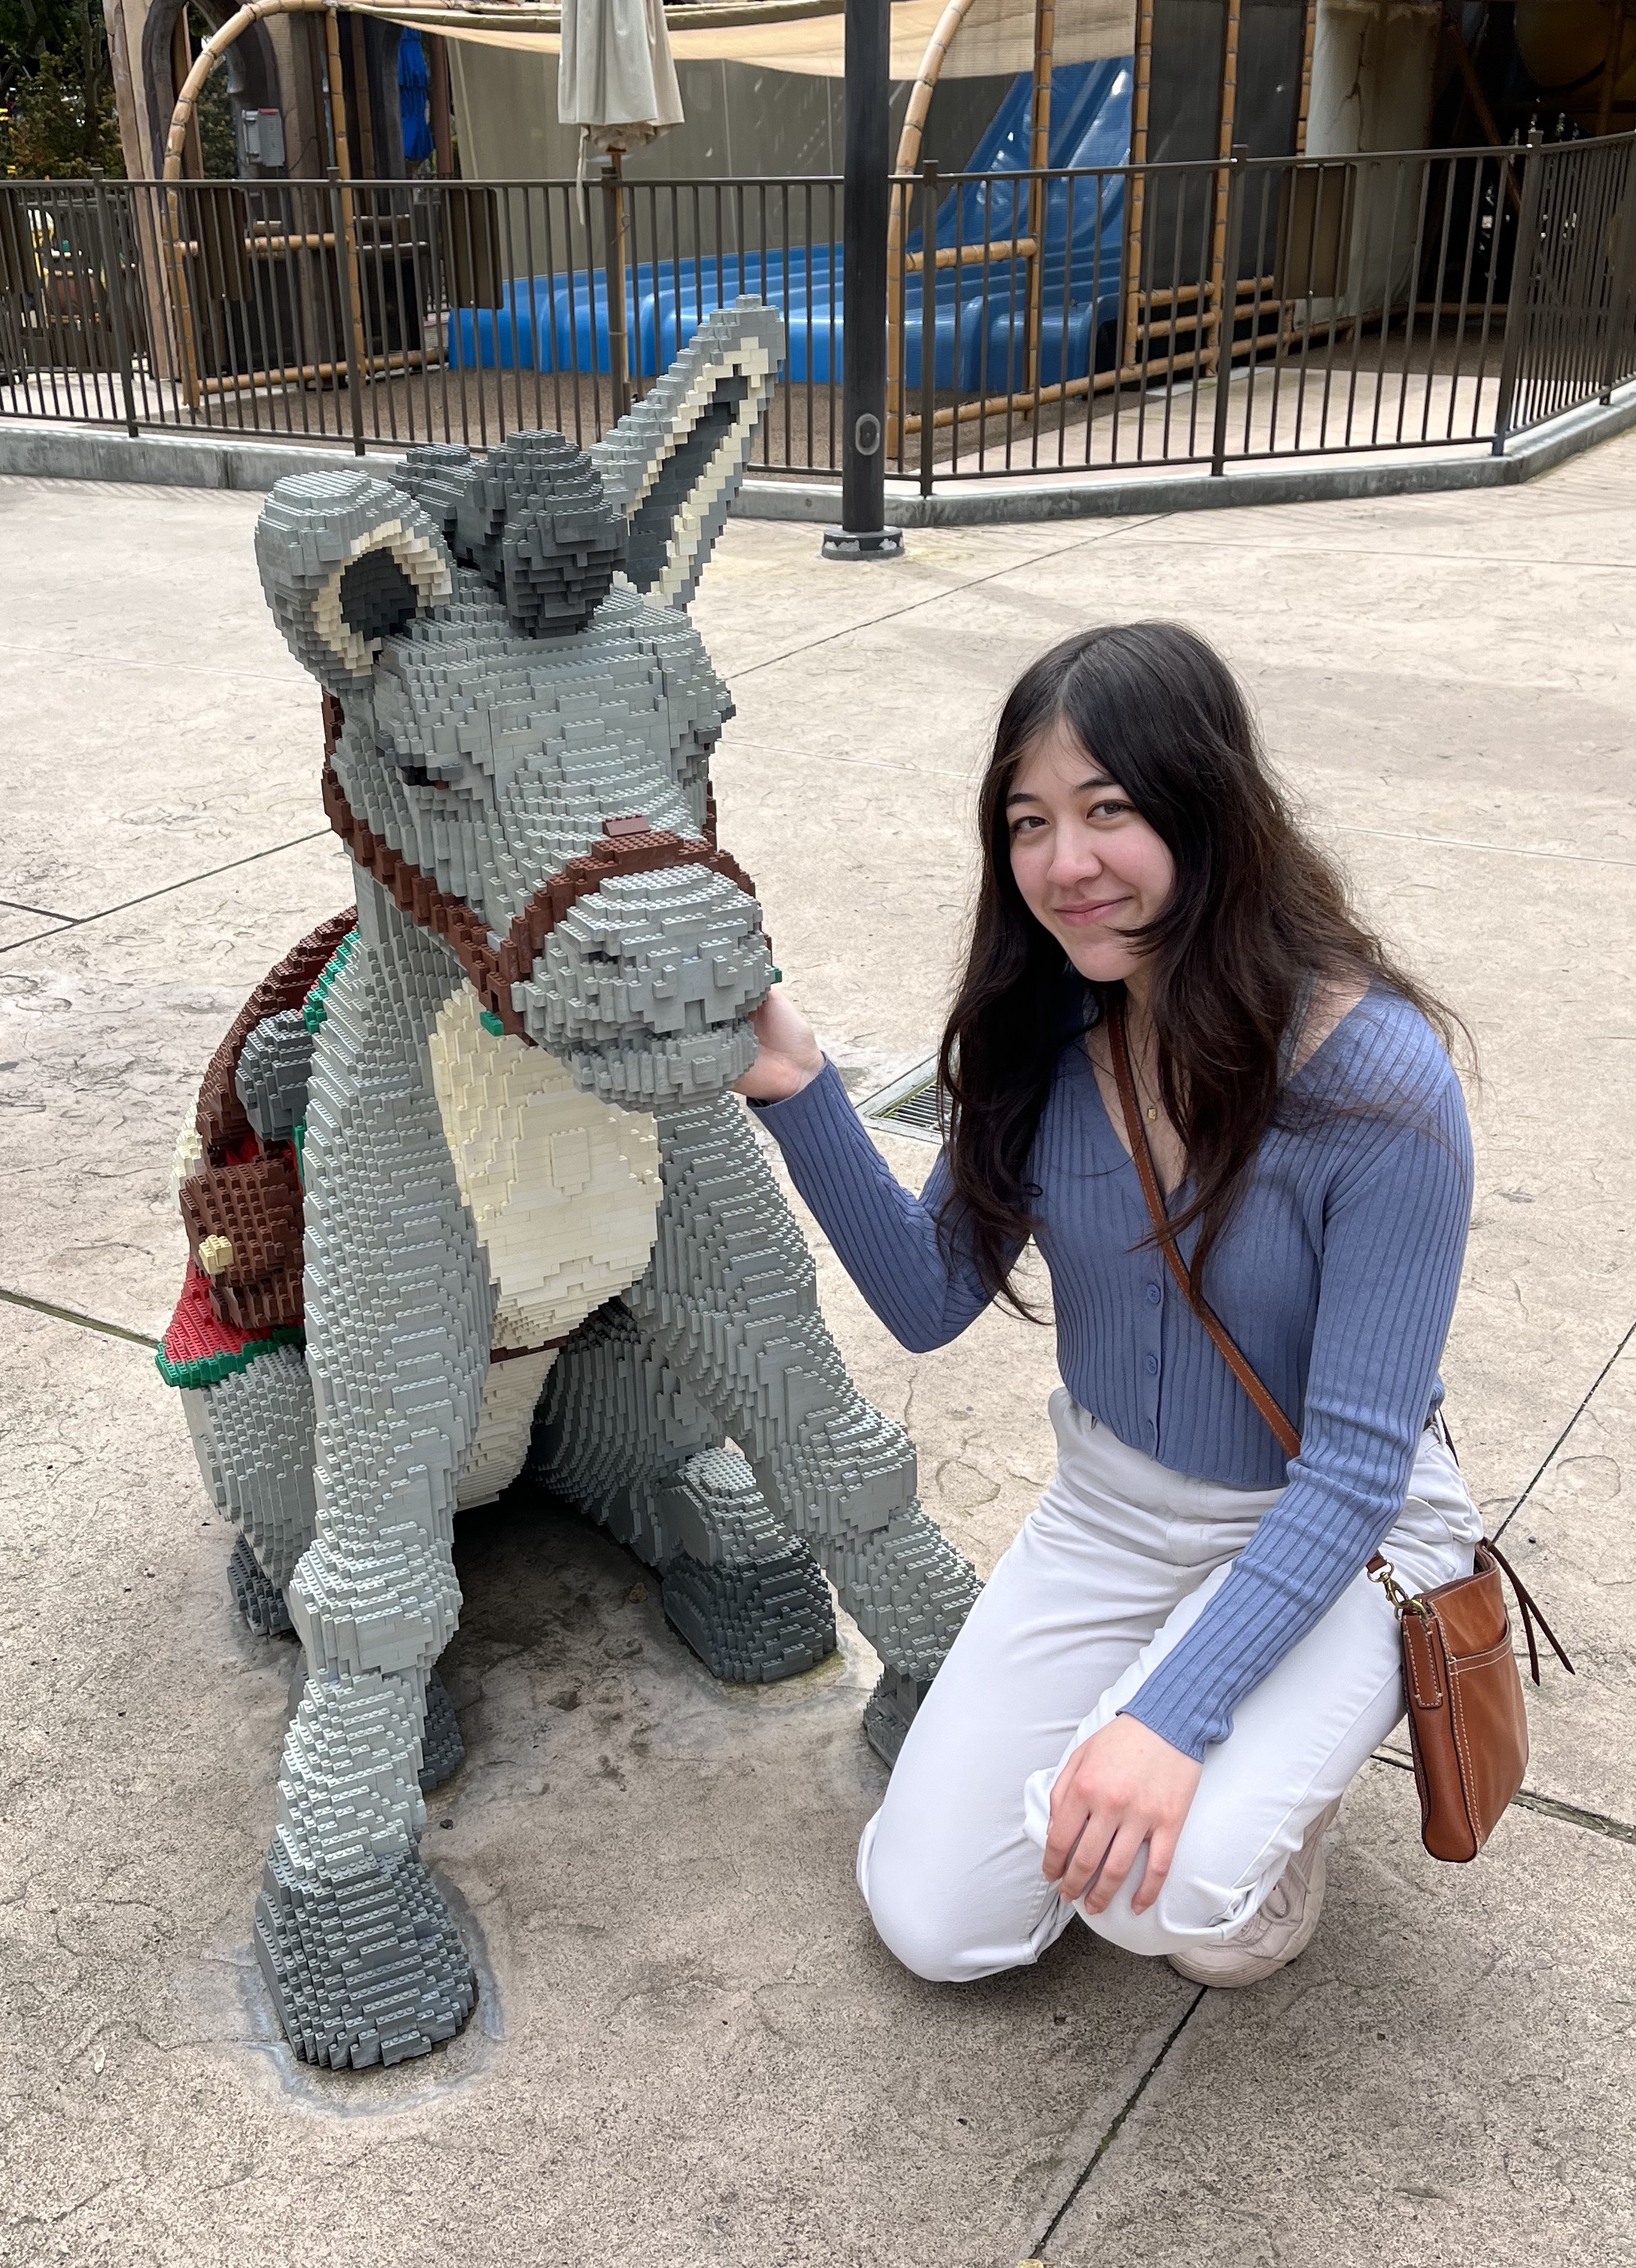 A picture of Sheridan next to a donkey at Legoland (a Lego donkey).